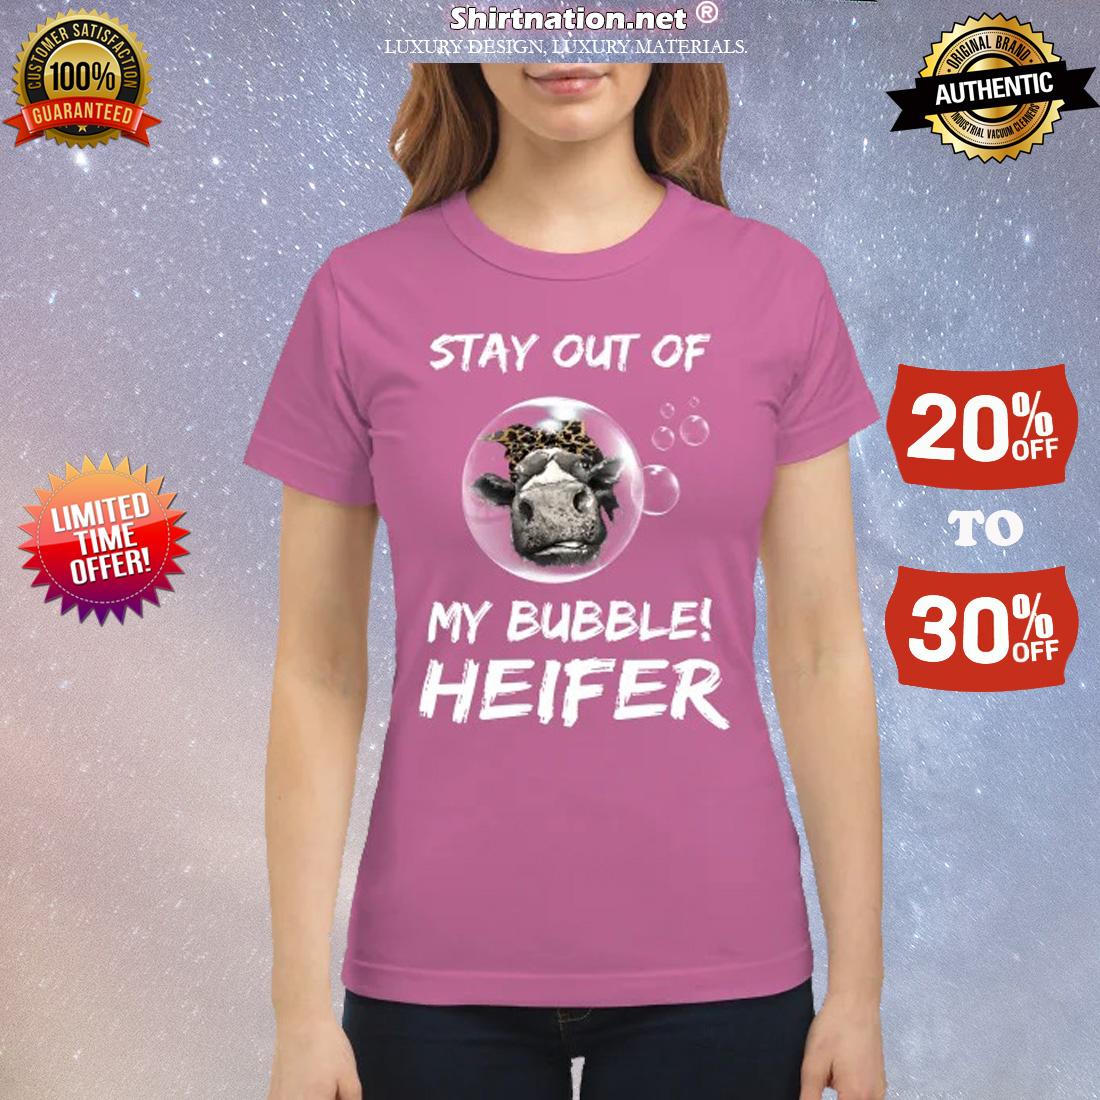 Stay out of my bubble heifer classic shirt